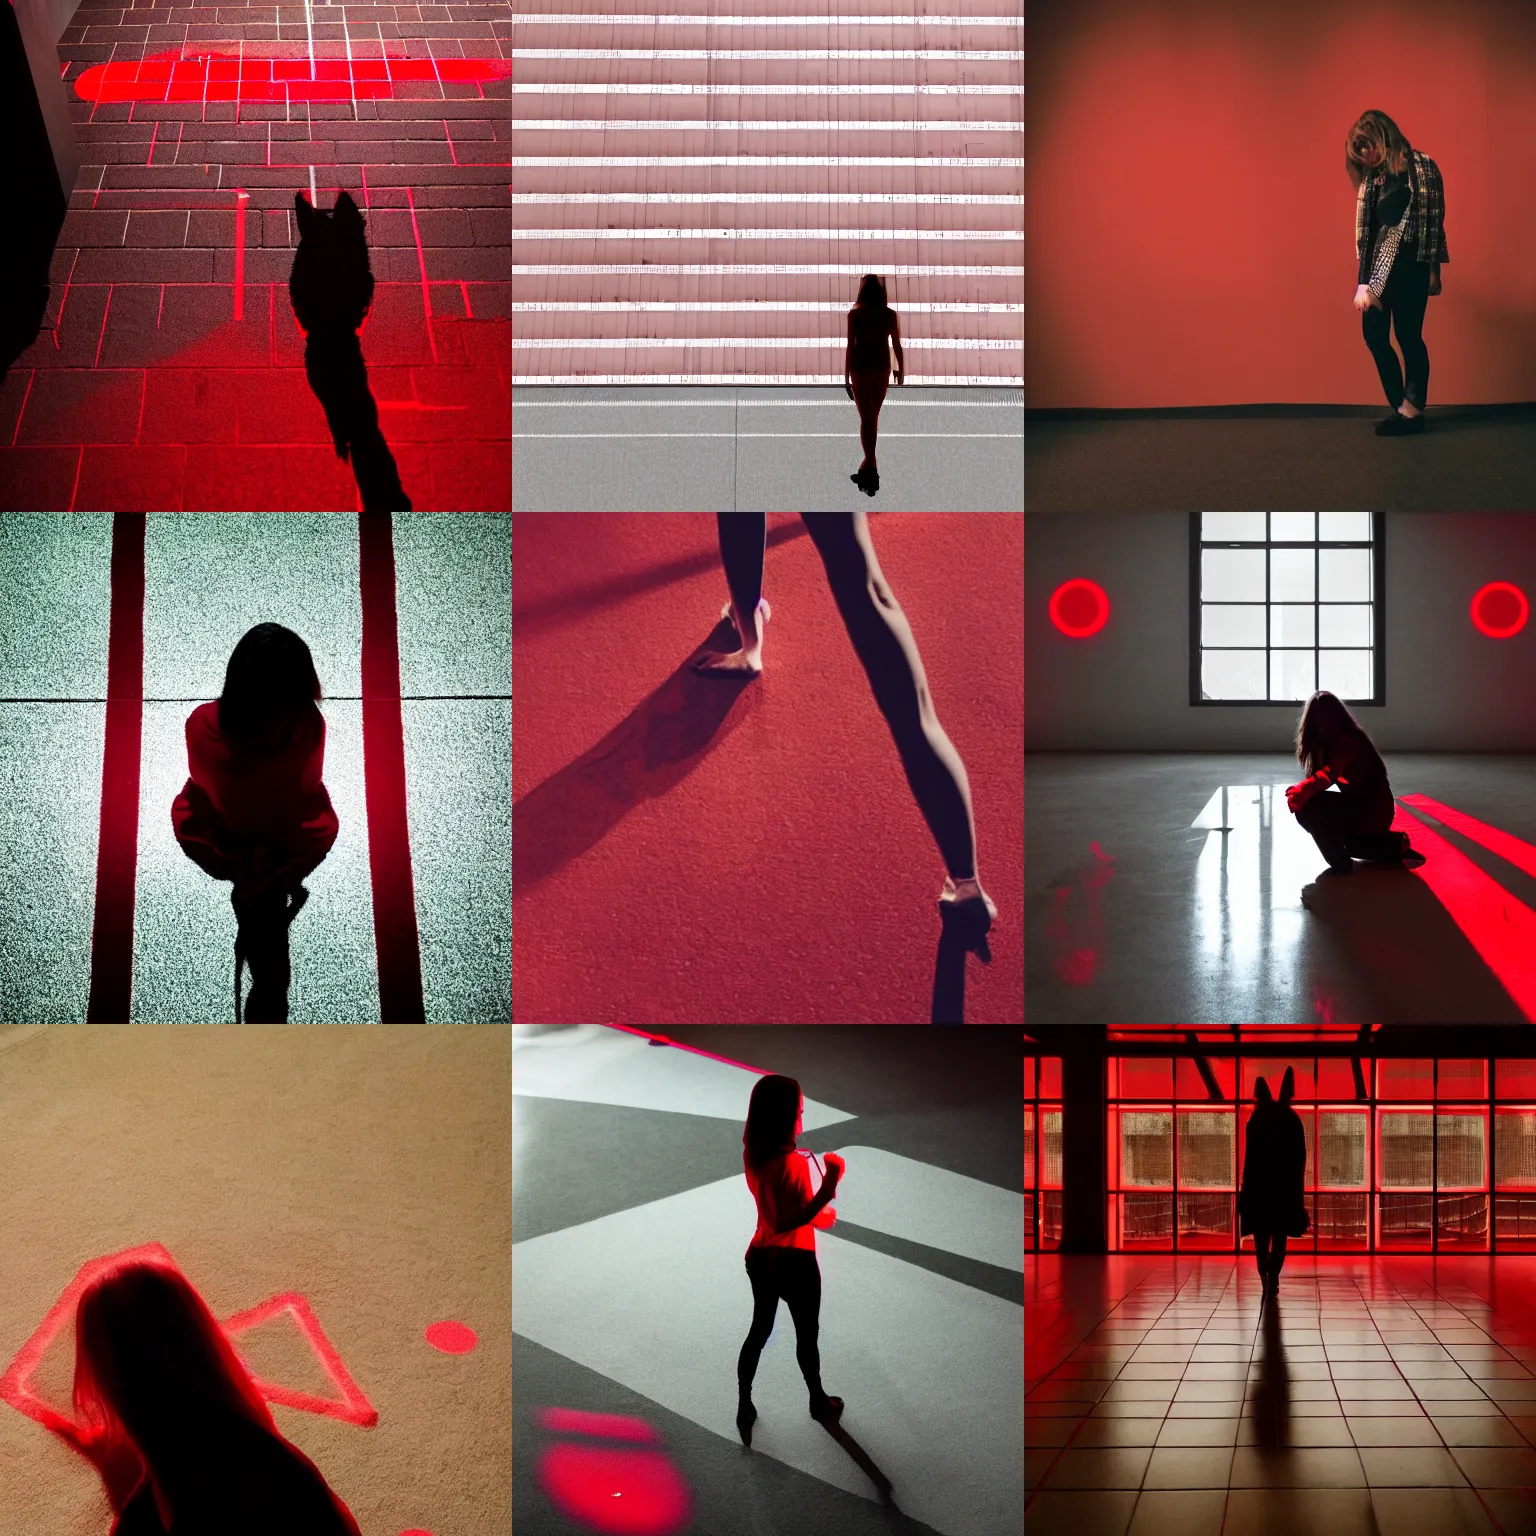 Prompt: she sees her own shadow cast in red light and outlined on the floor below her and it is beautiful